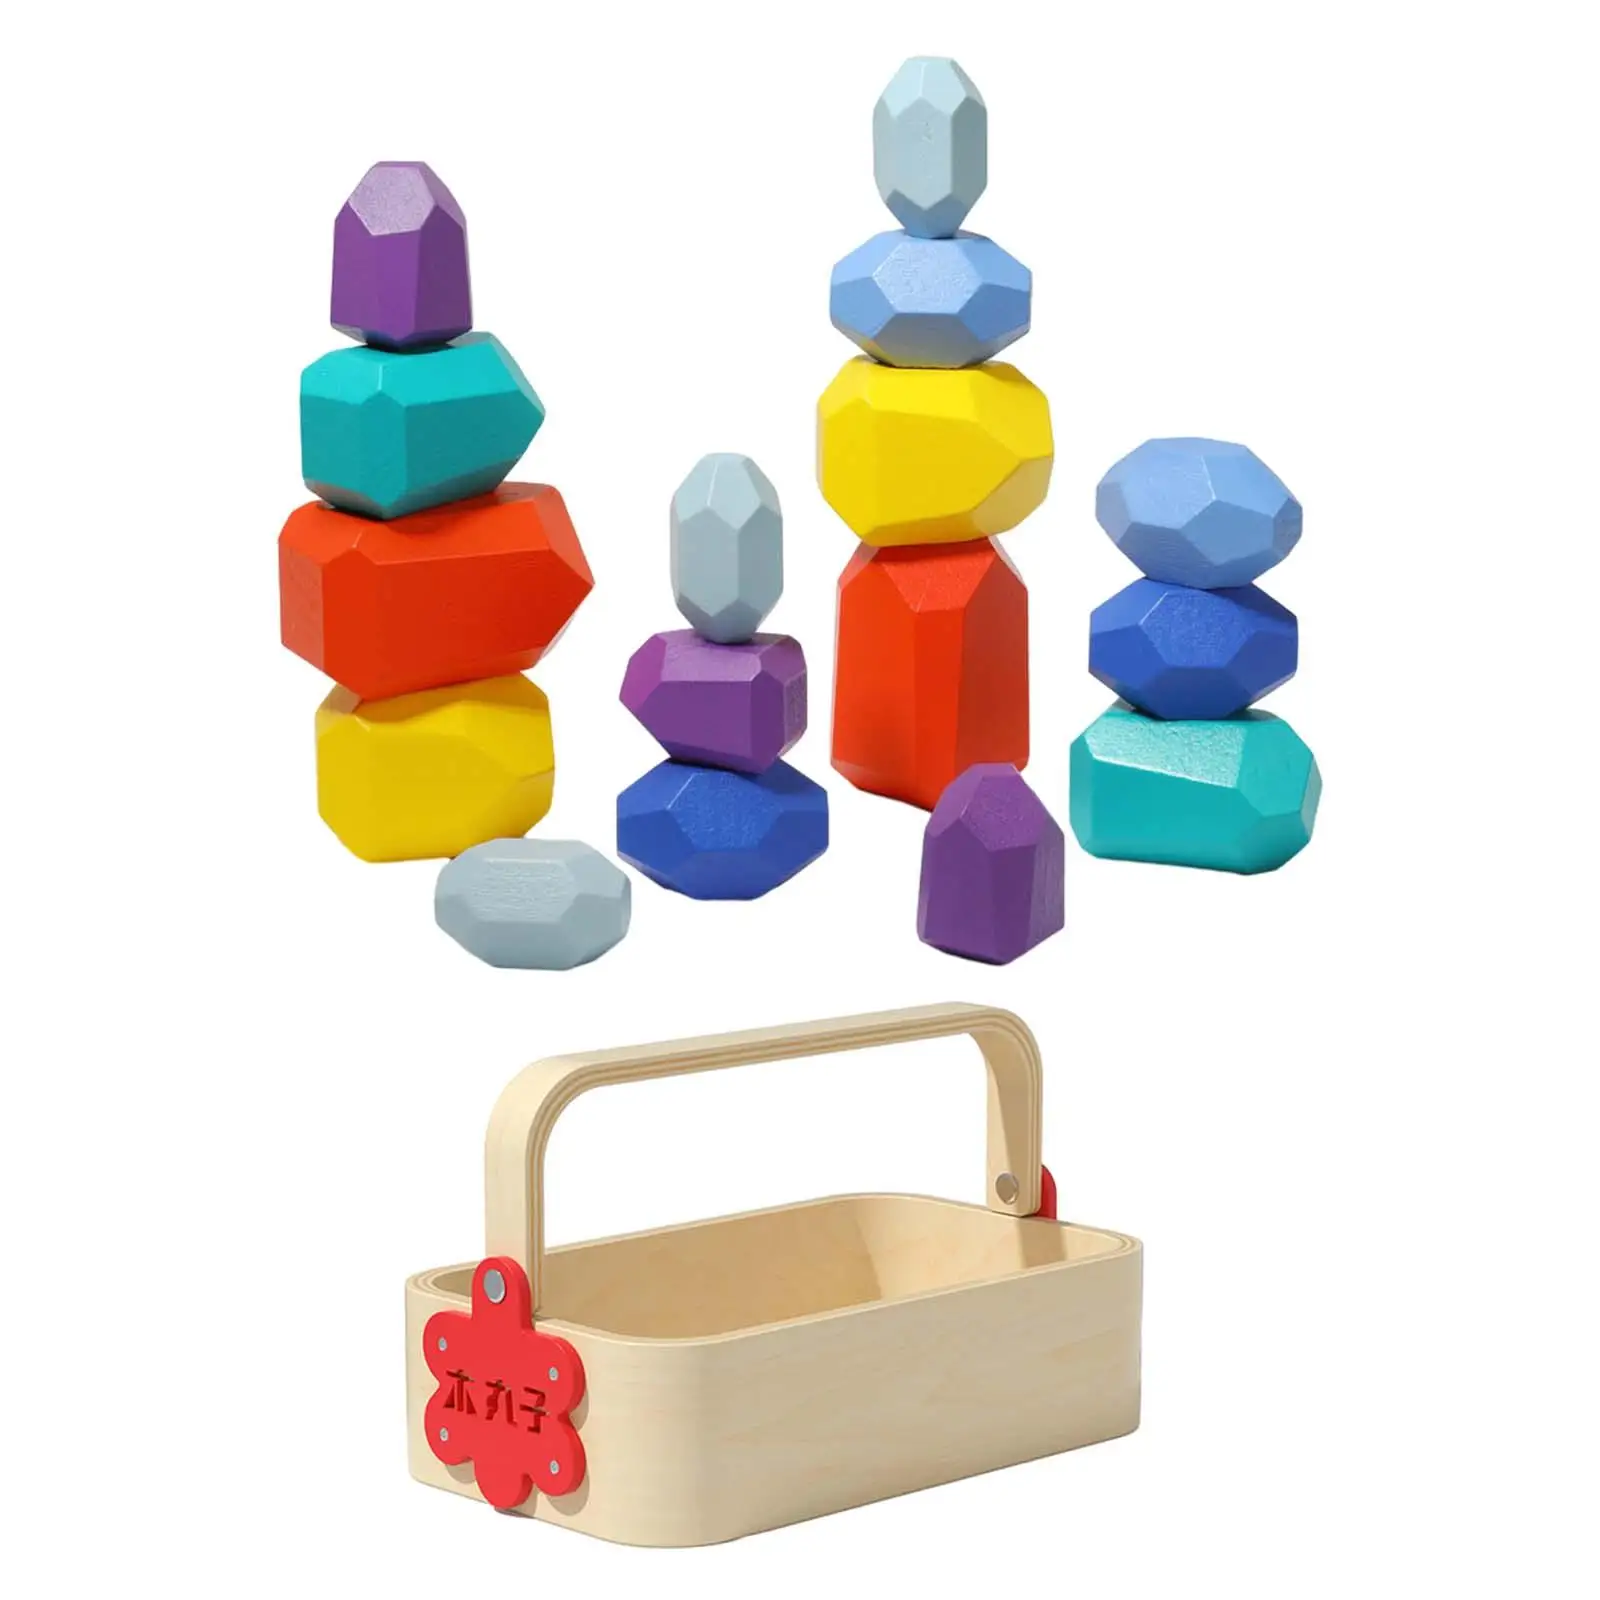 Stacking Blocks Balancing Stacking Hands on with Basket Educational Toy Montessori Toys Colorful Building Blocks for Children